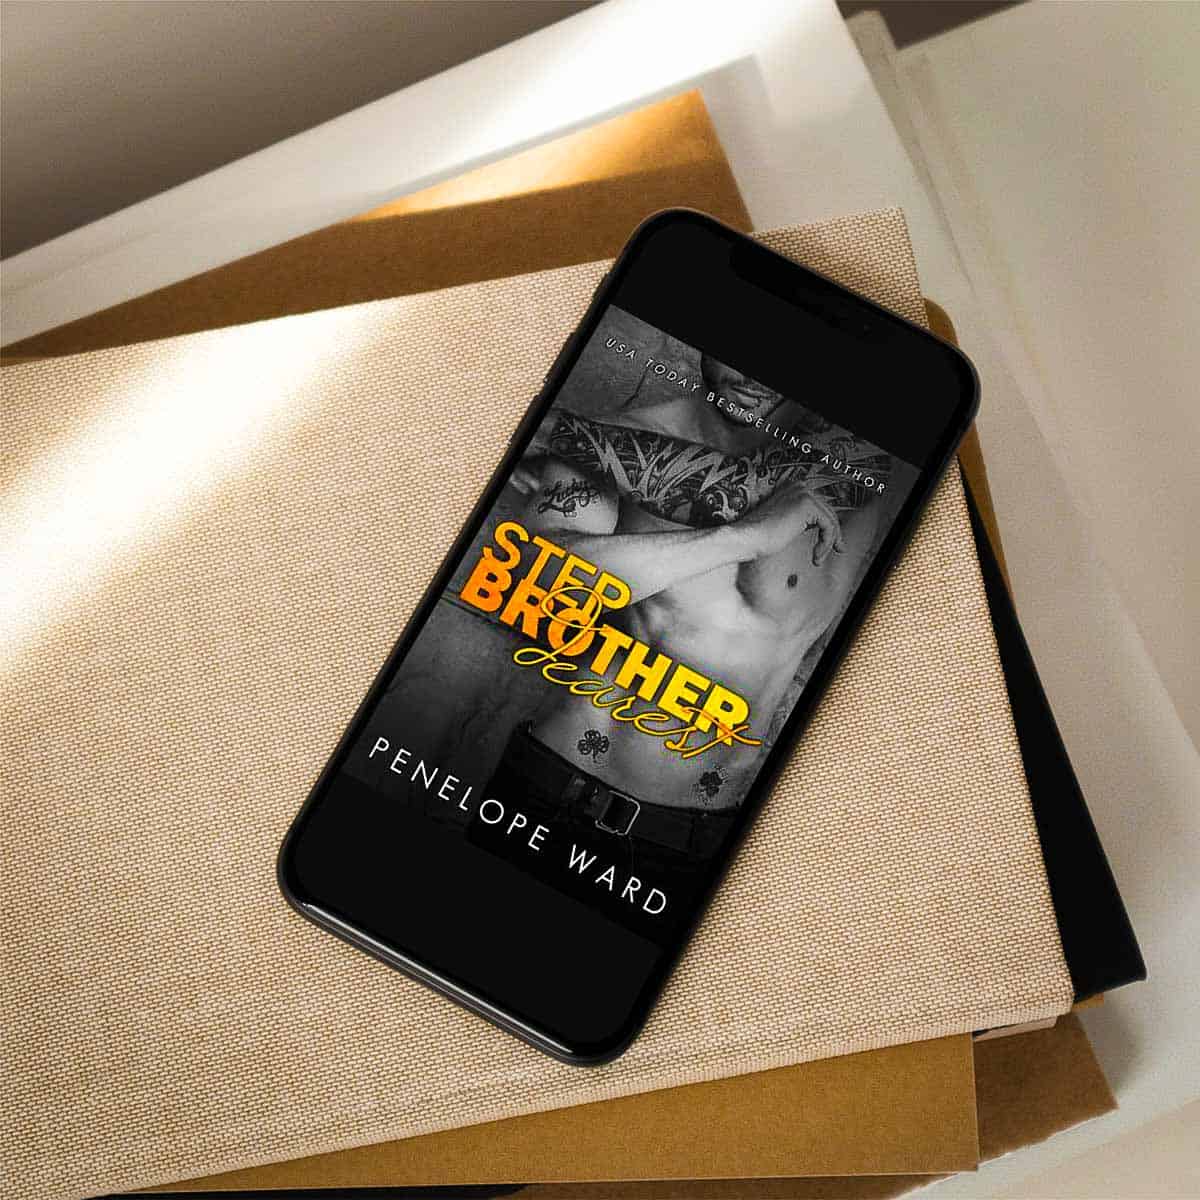 Stepbrother Dearest by Penelope Ward – Forbidden Love with a Twist!